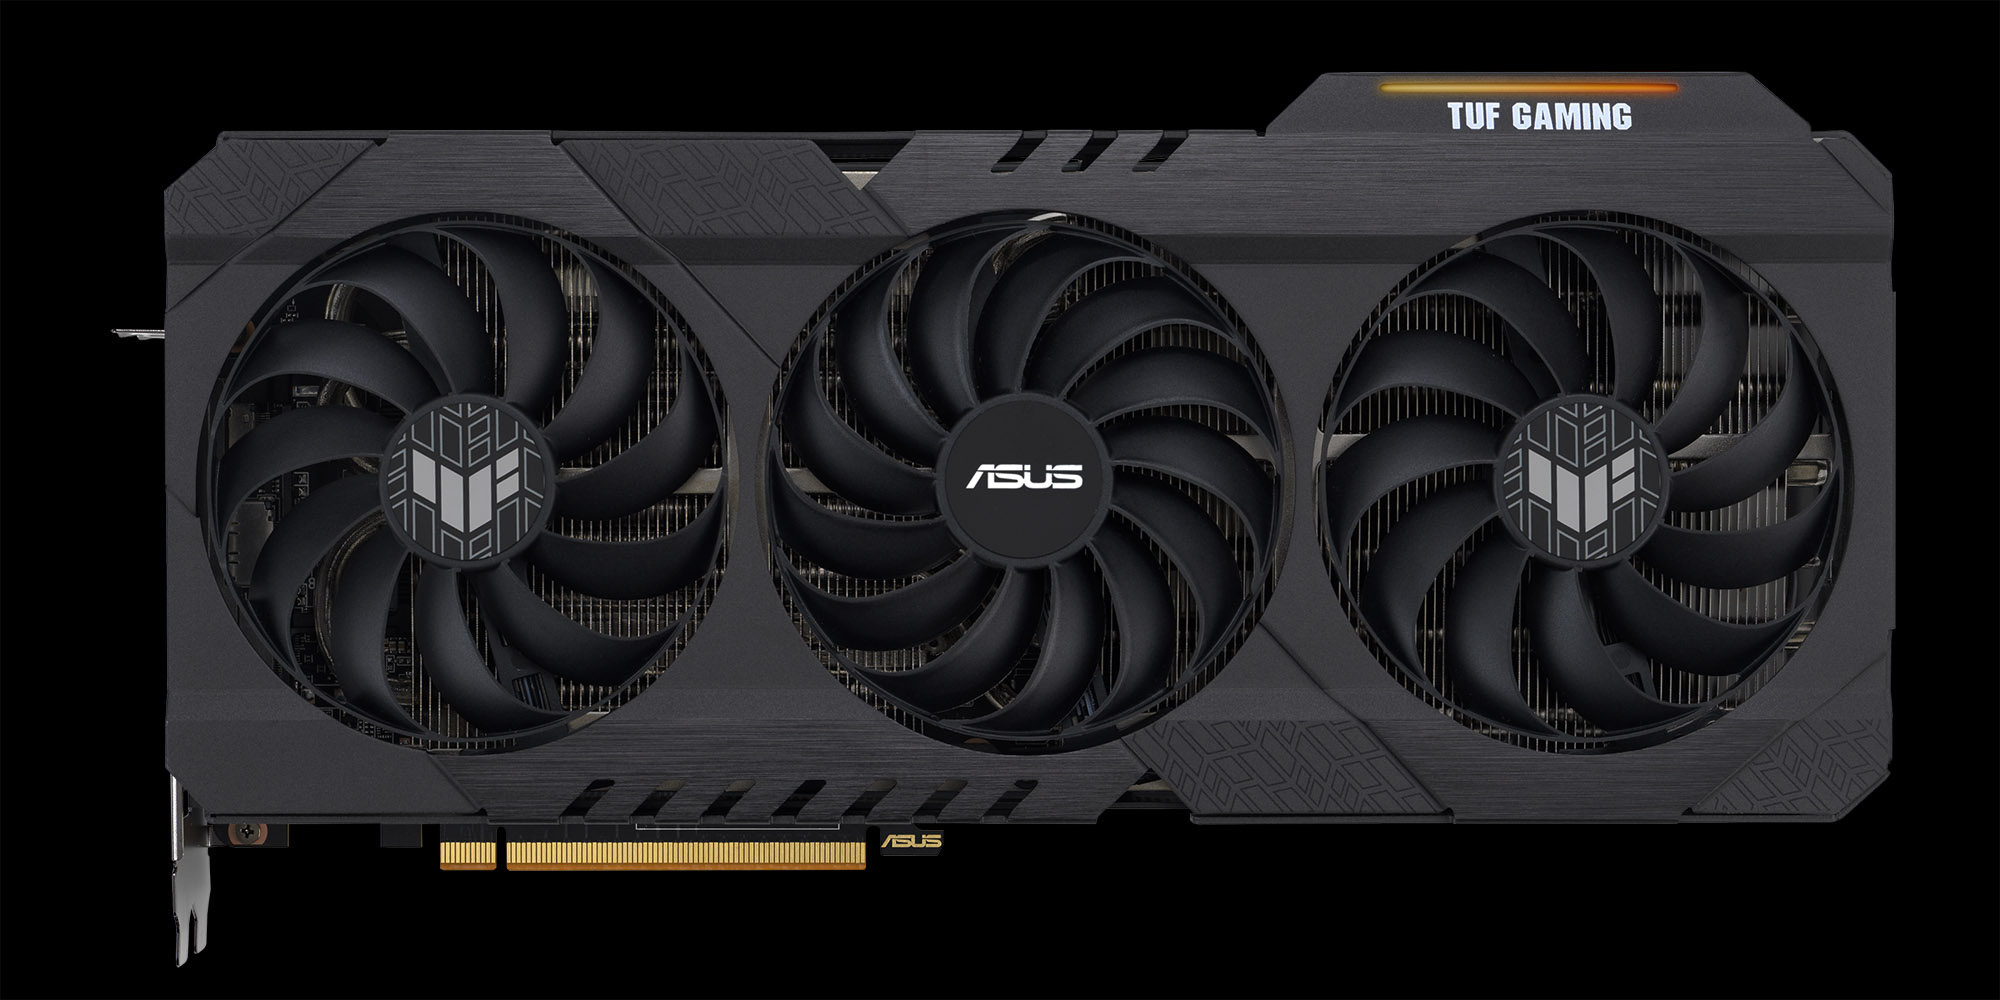 An image of the TUF Gaming Radeon RX 6950 XT graphics card on a black background.